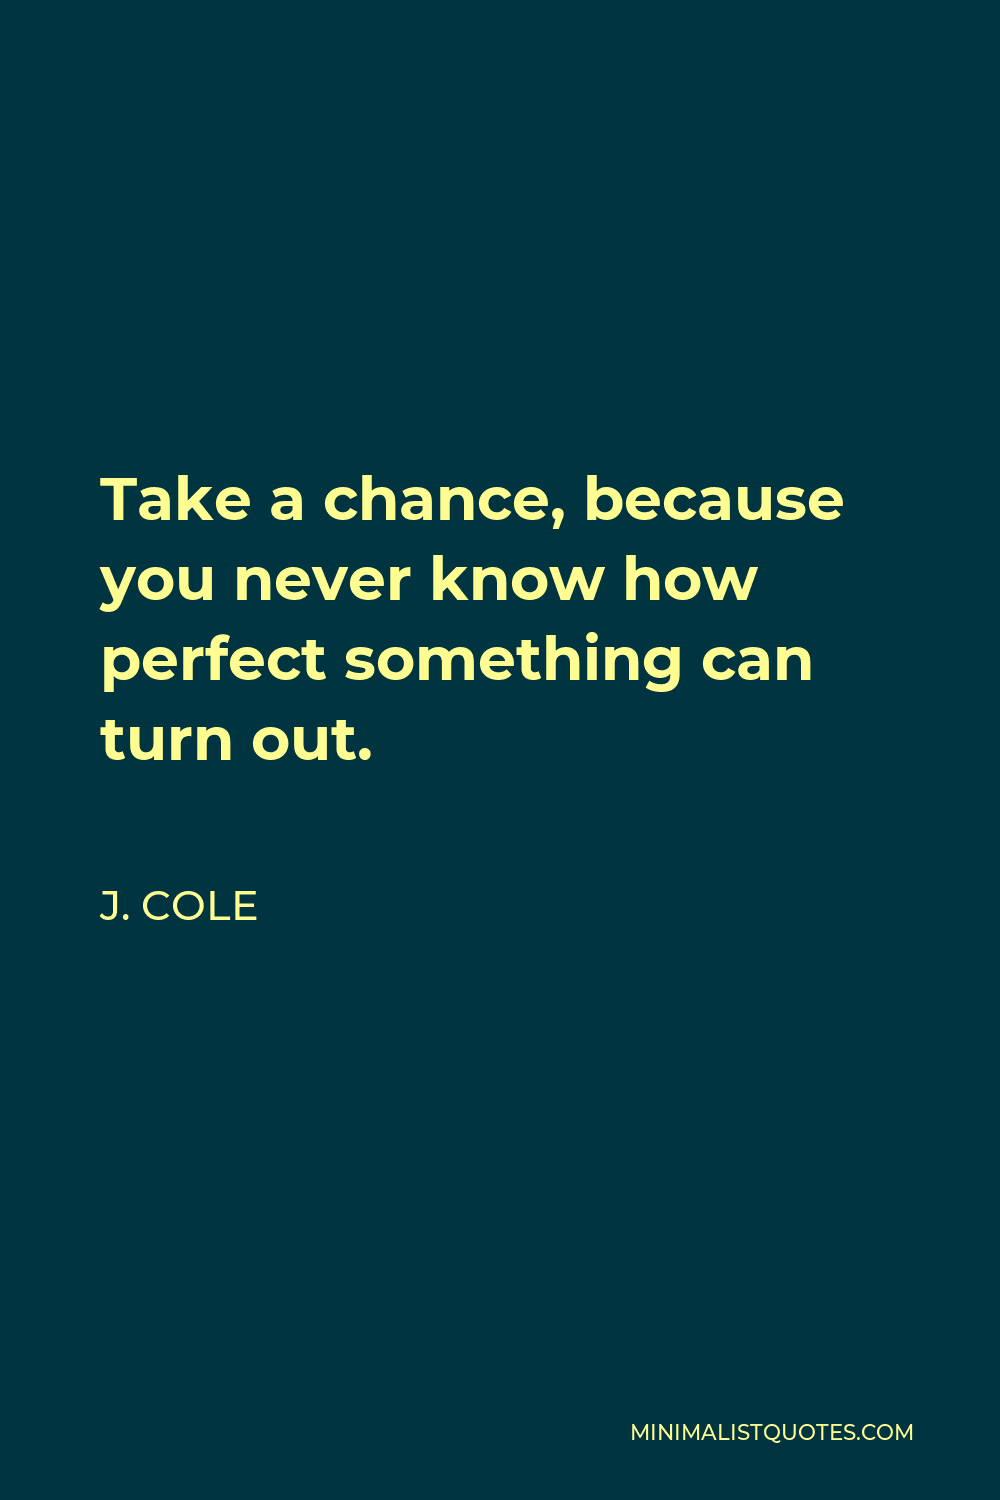 J. Cole Quote - Take a chance, because you never know how perfect something can turn out.